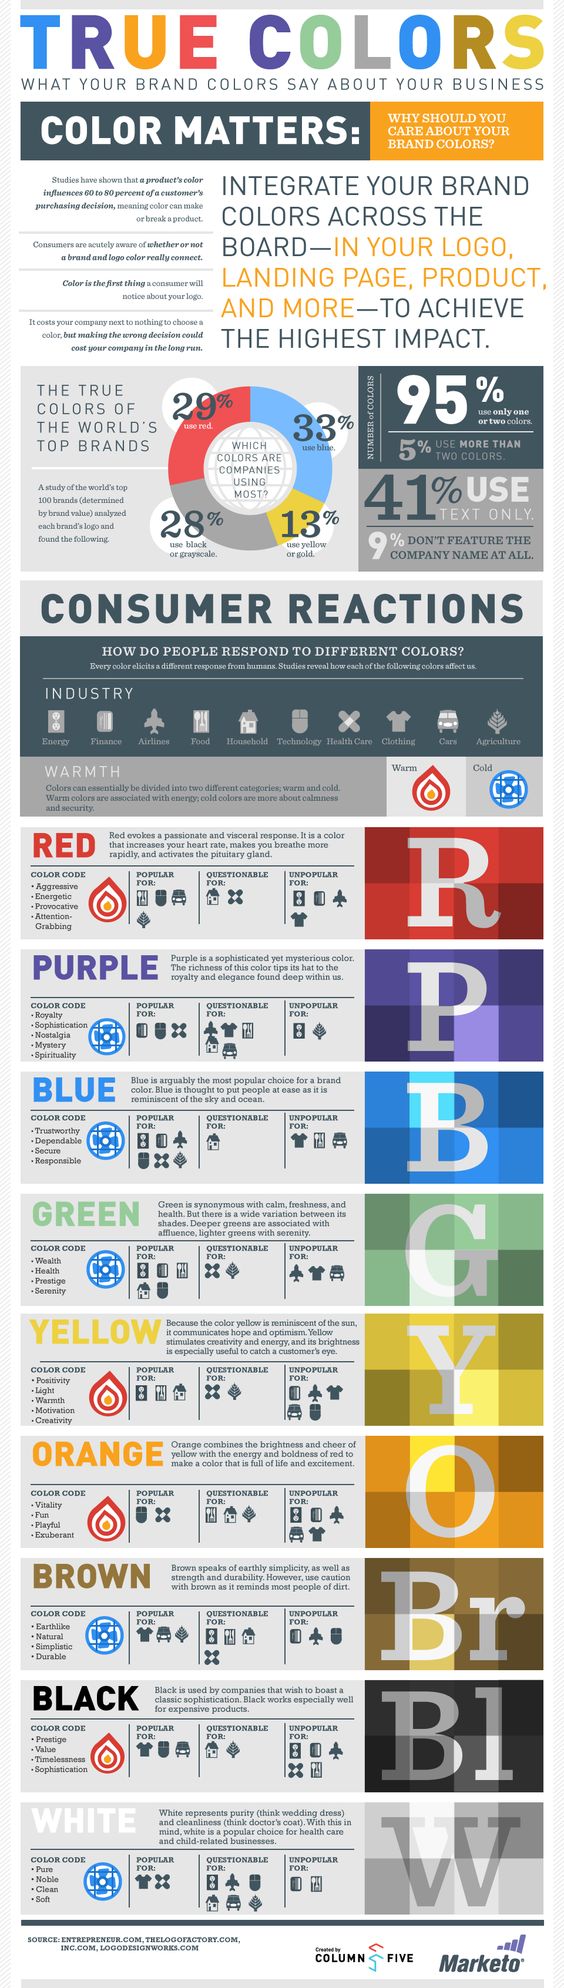 What your brand colours say about your business (Marketo, 2012)